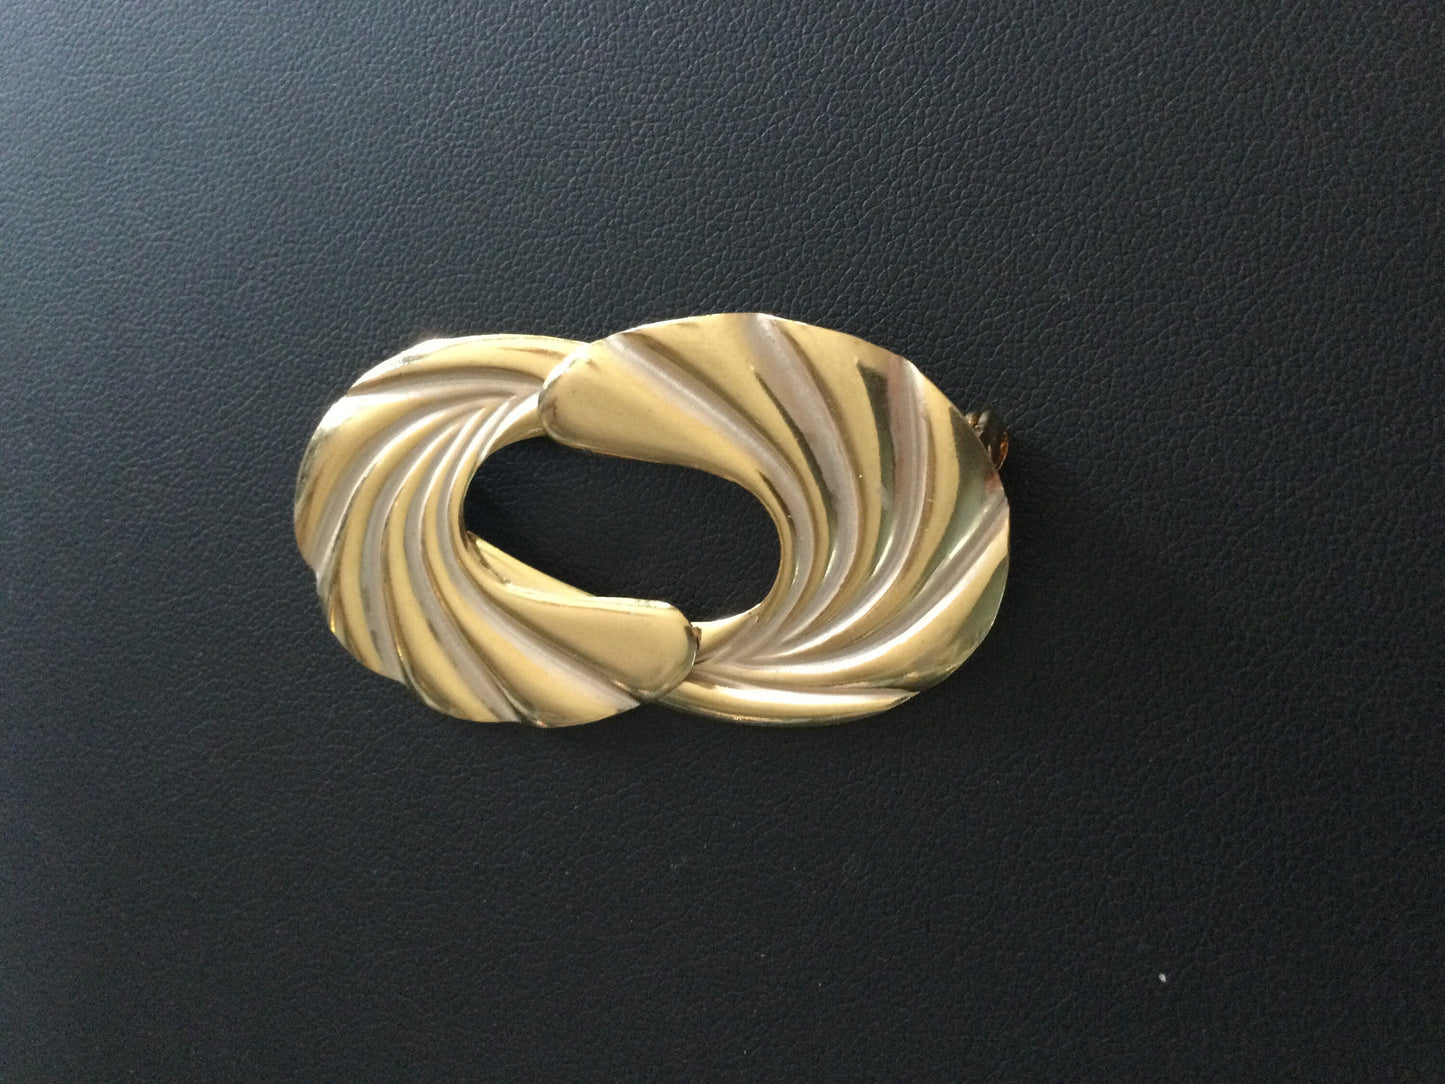 vintage gold & white silver tone enamel abstract swirl brooch roll clasp